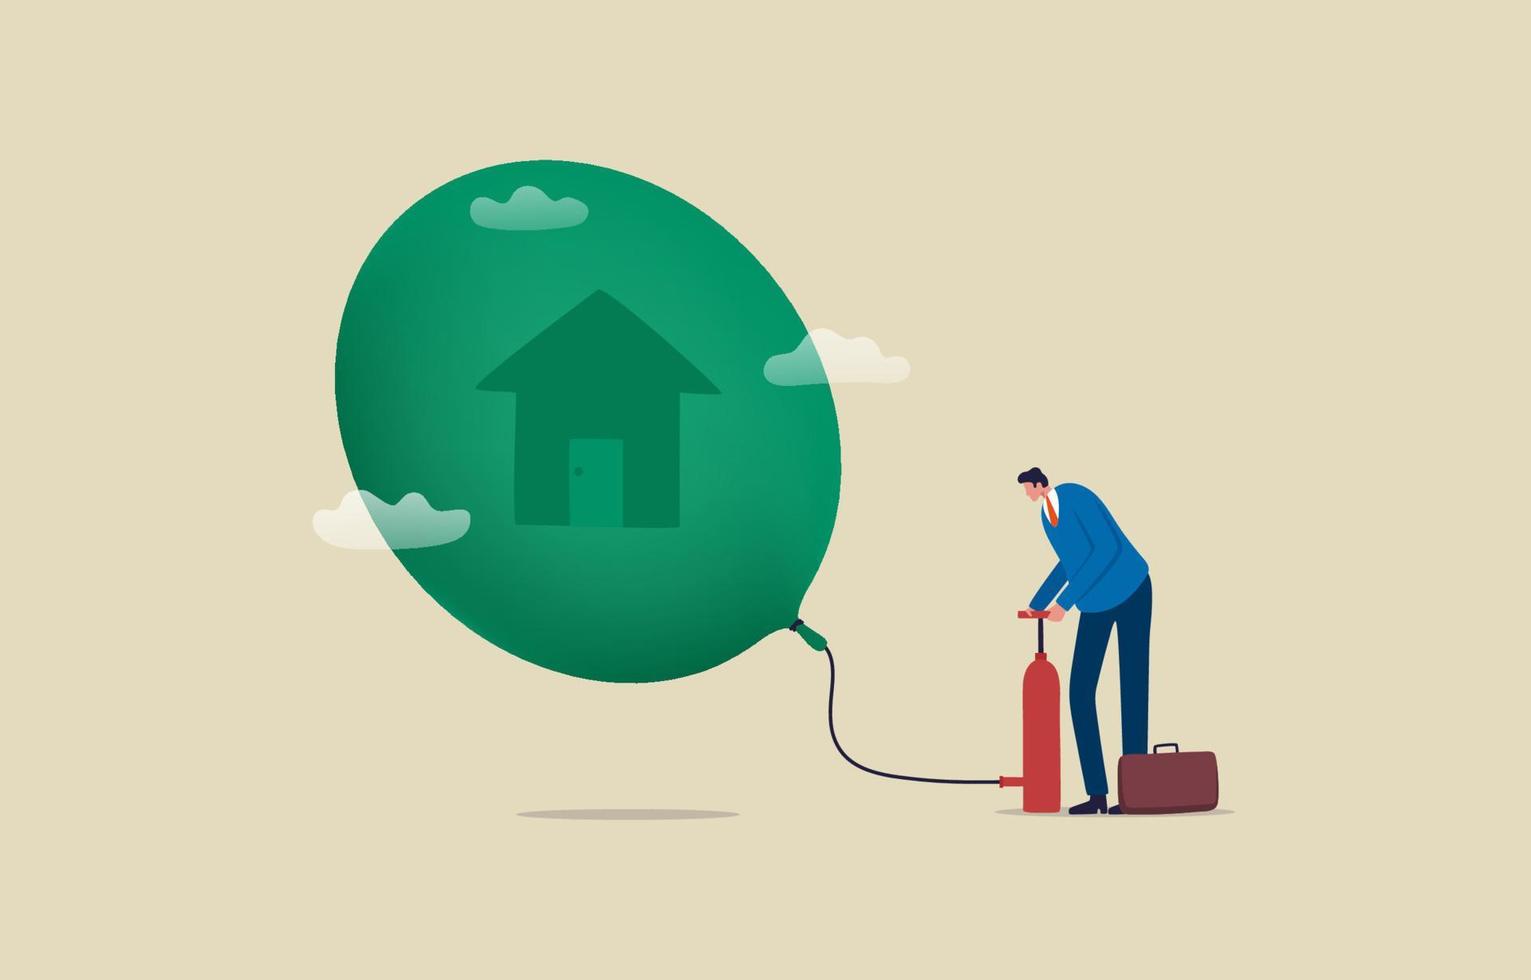 Real estate or property bubble. House mortgage interest rate rising up. real estate inflation. Businessman inflates a house symbol balloon with tire pump. illustration vector